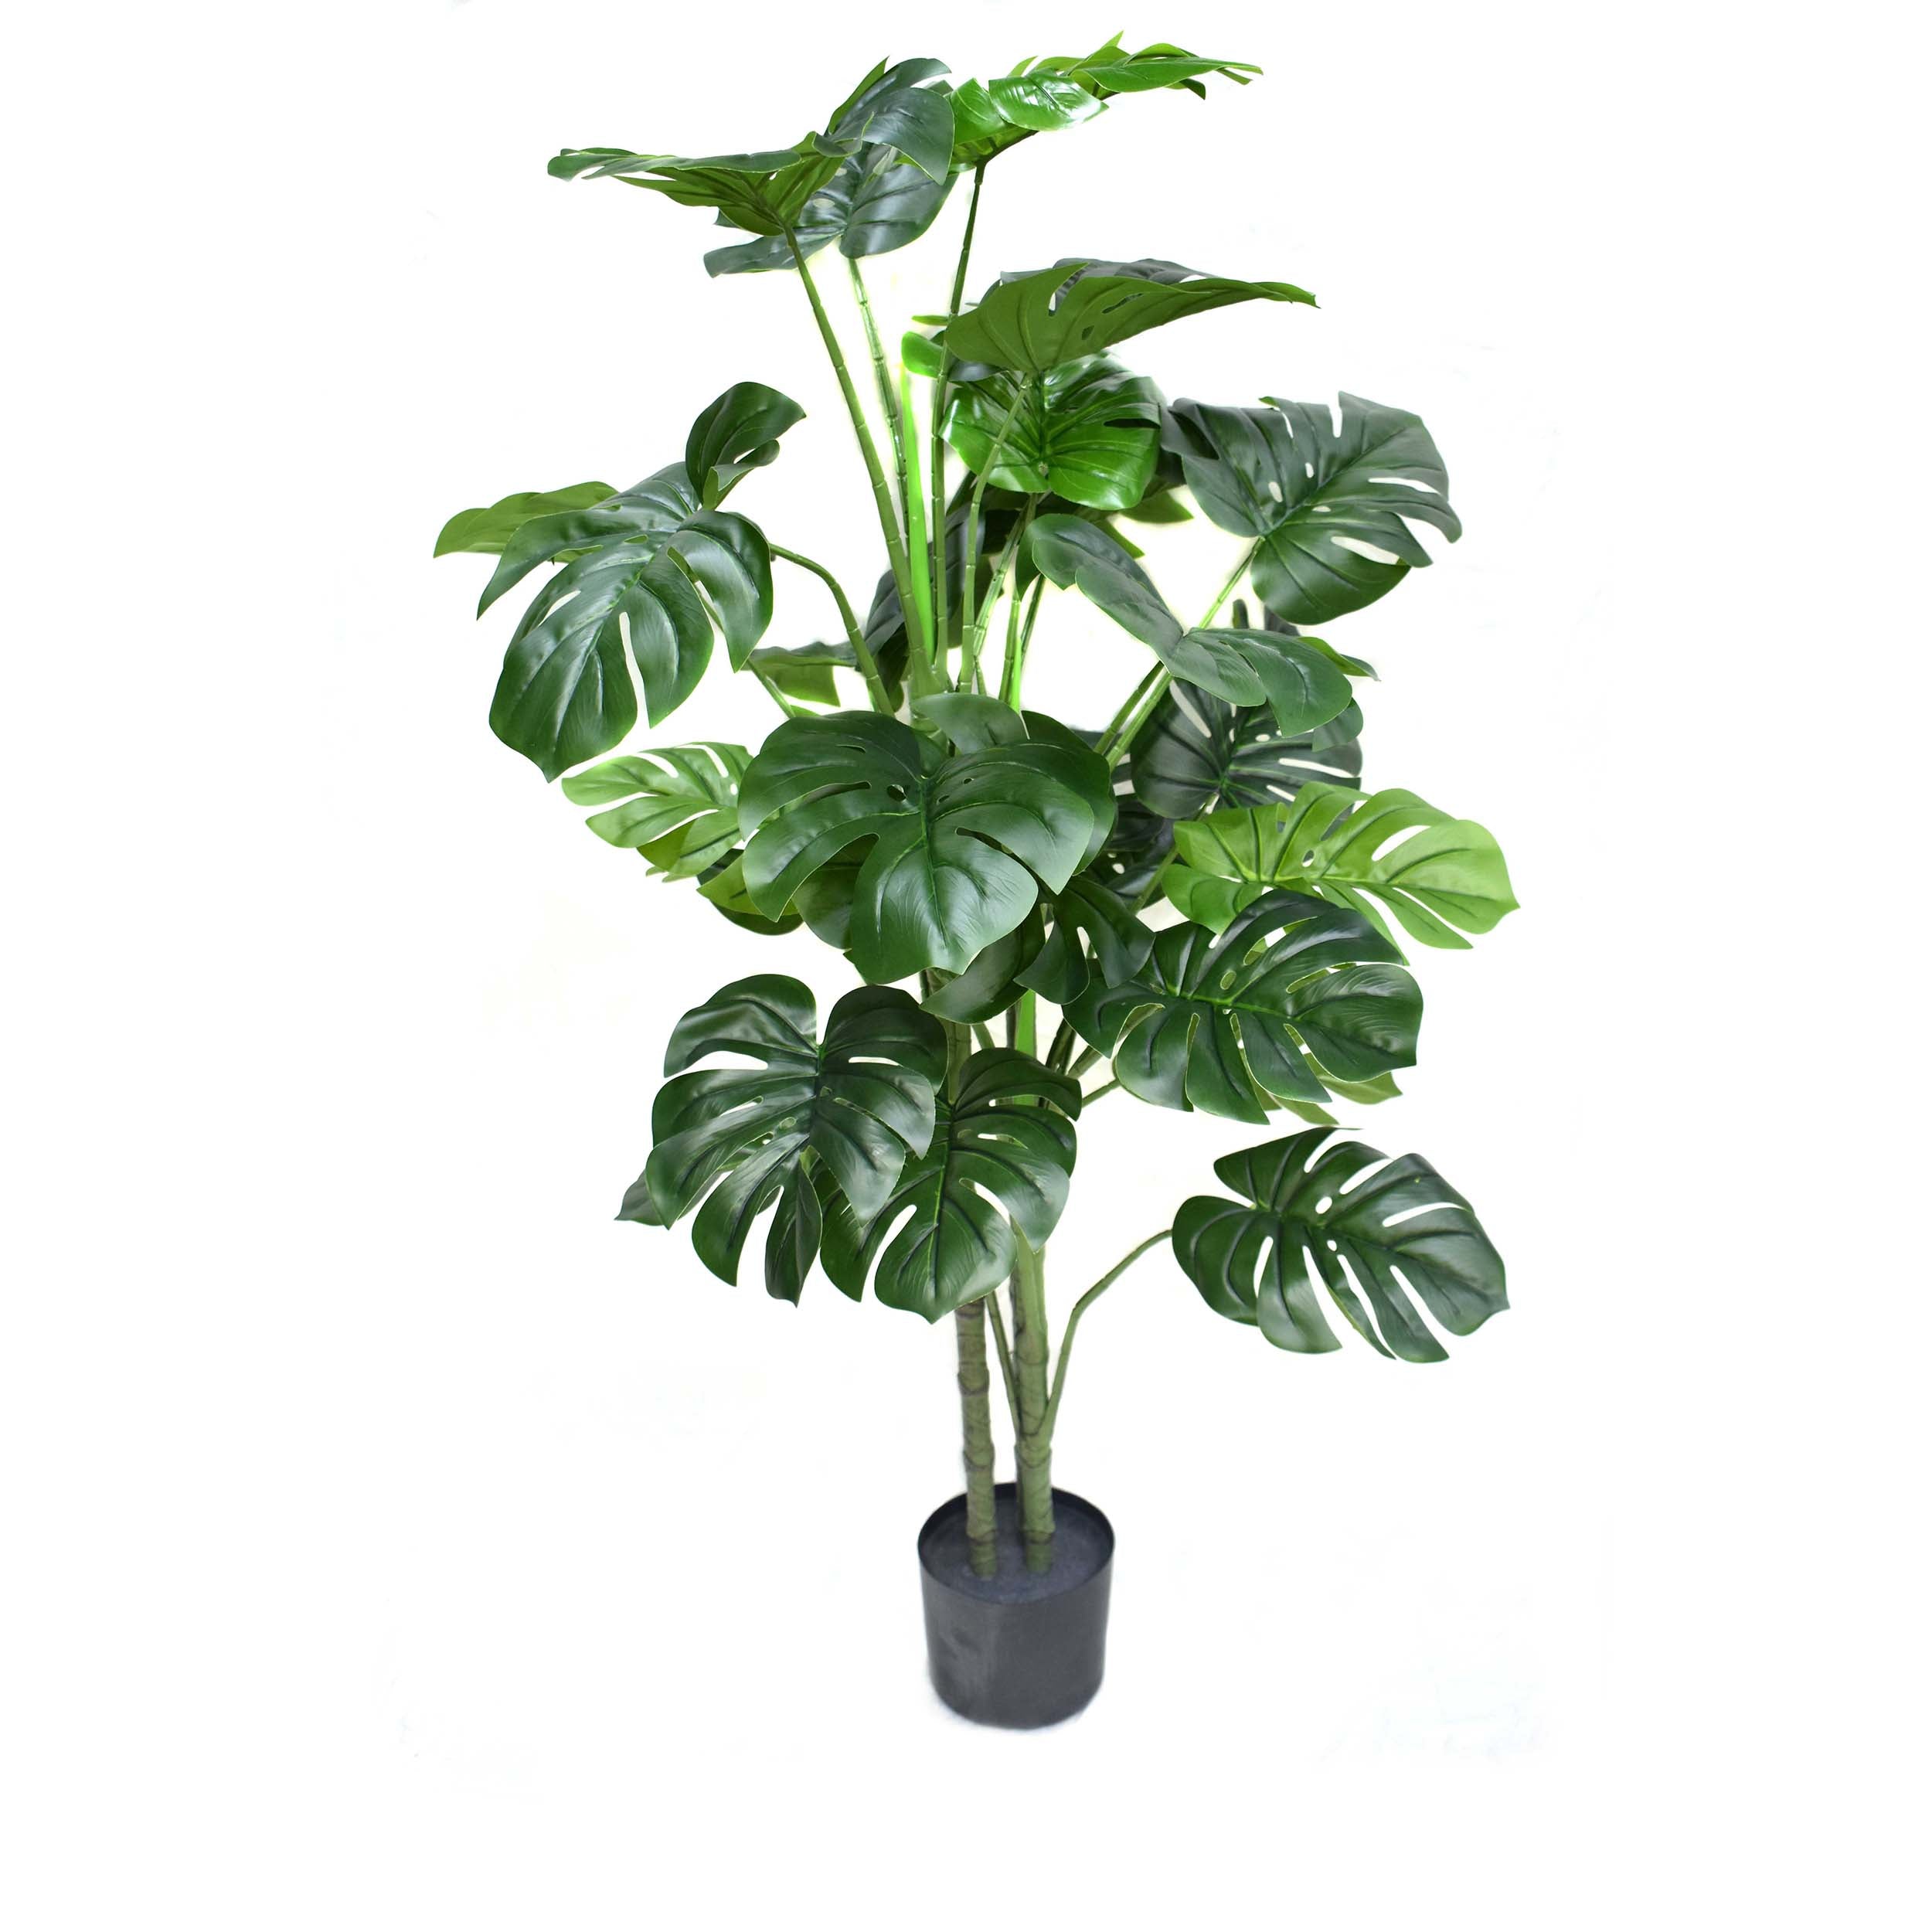 Aavana Greens Decorative Artificial Monstera Plants Pack Of 1